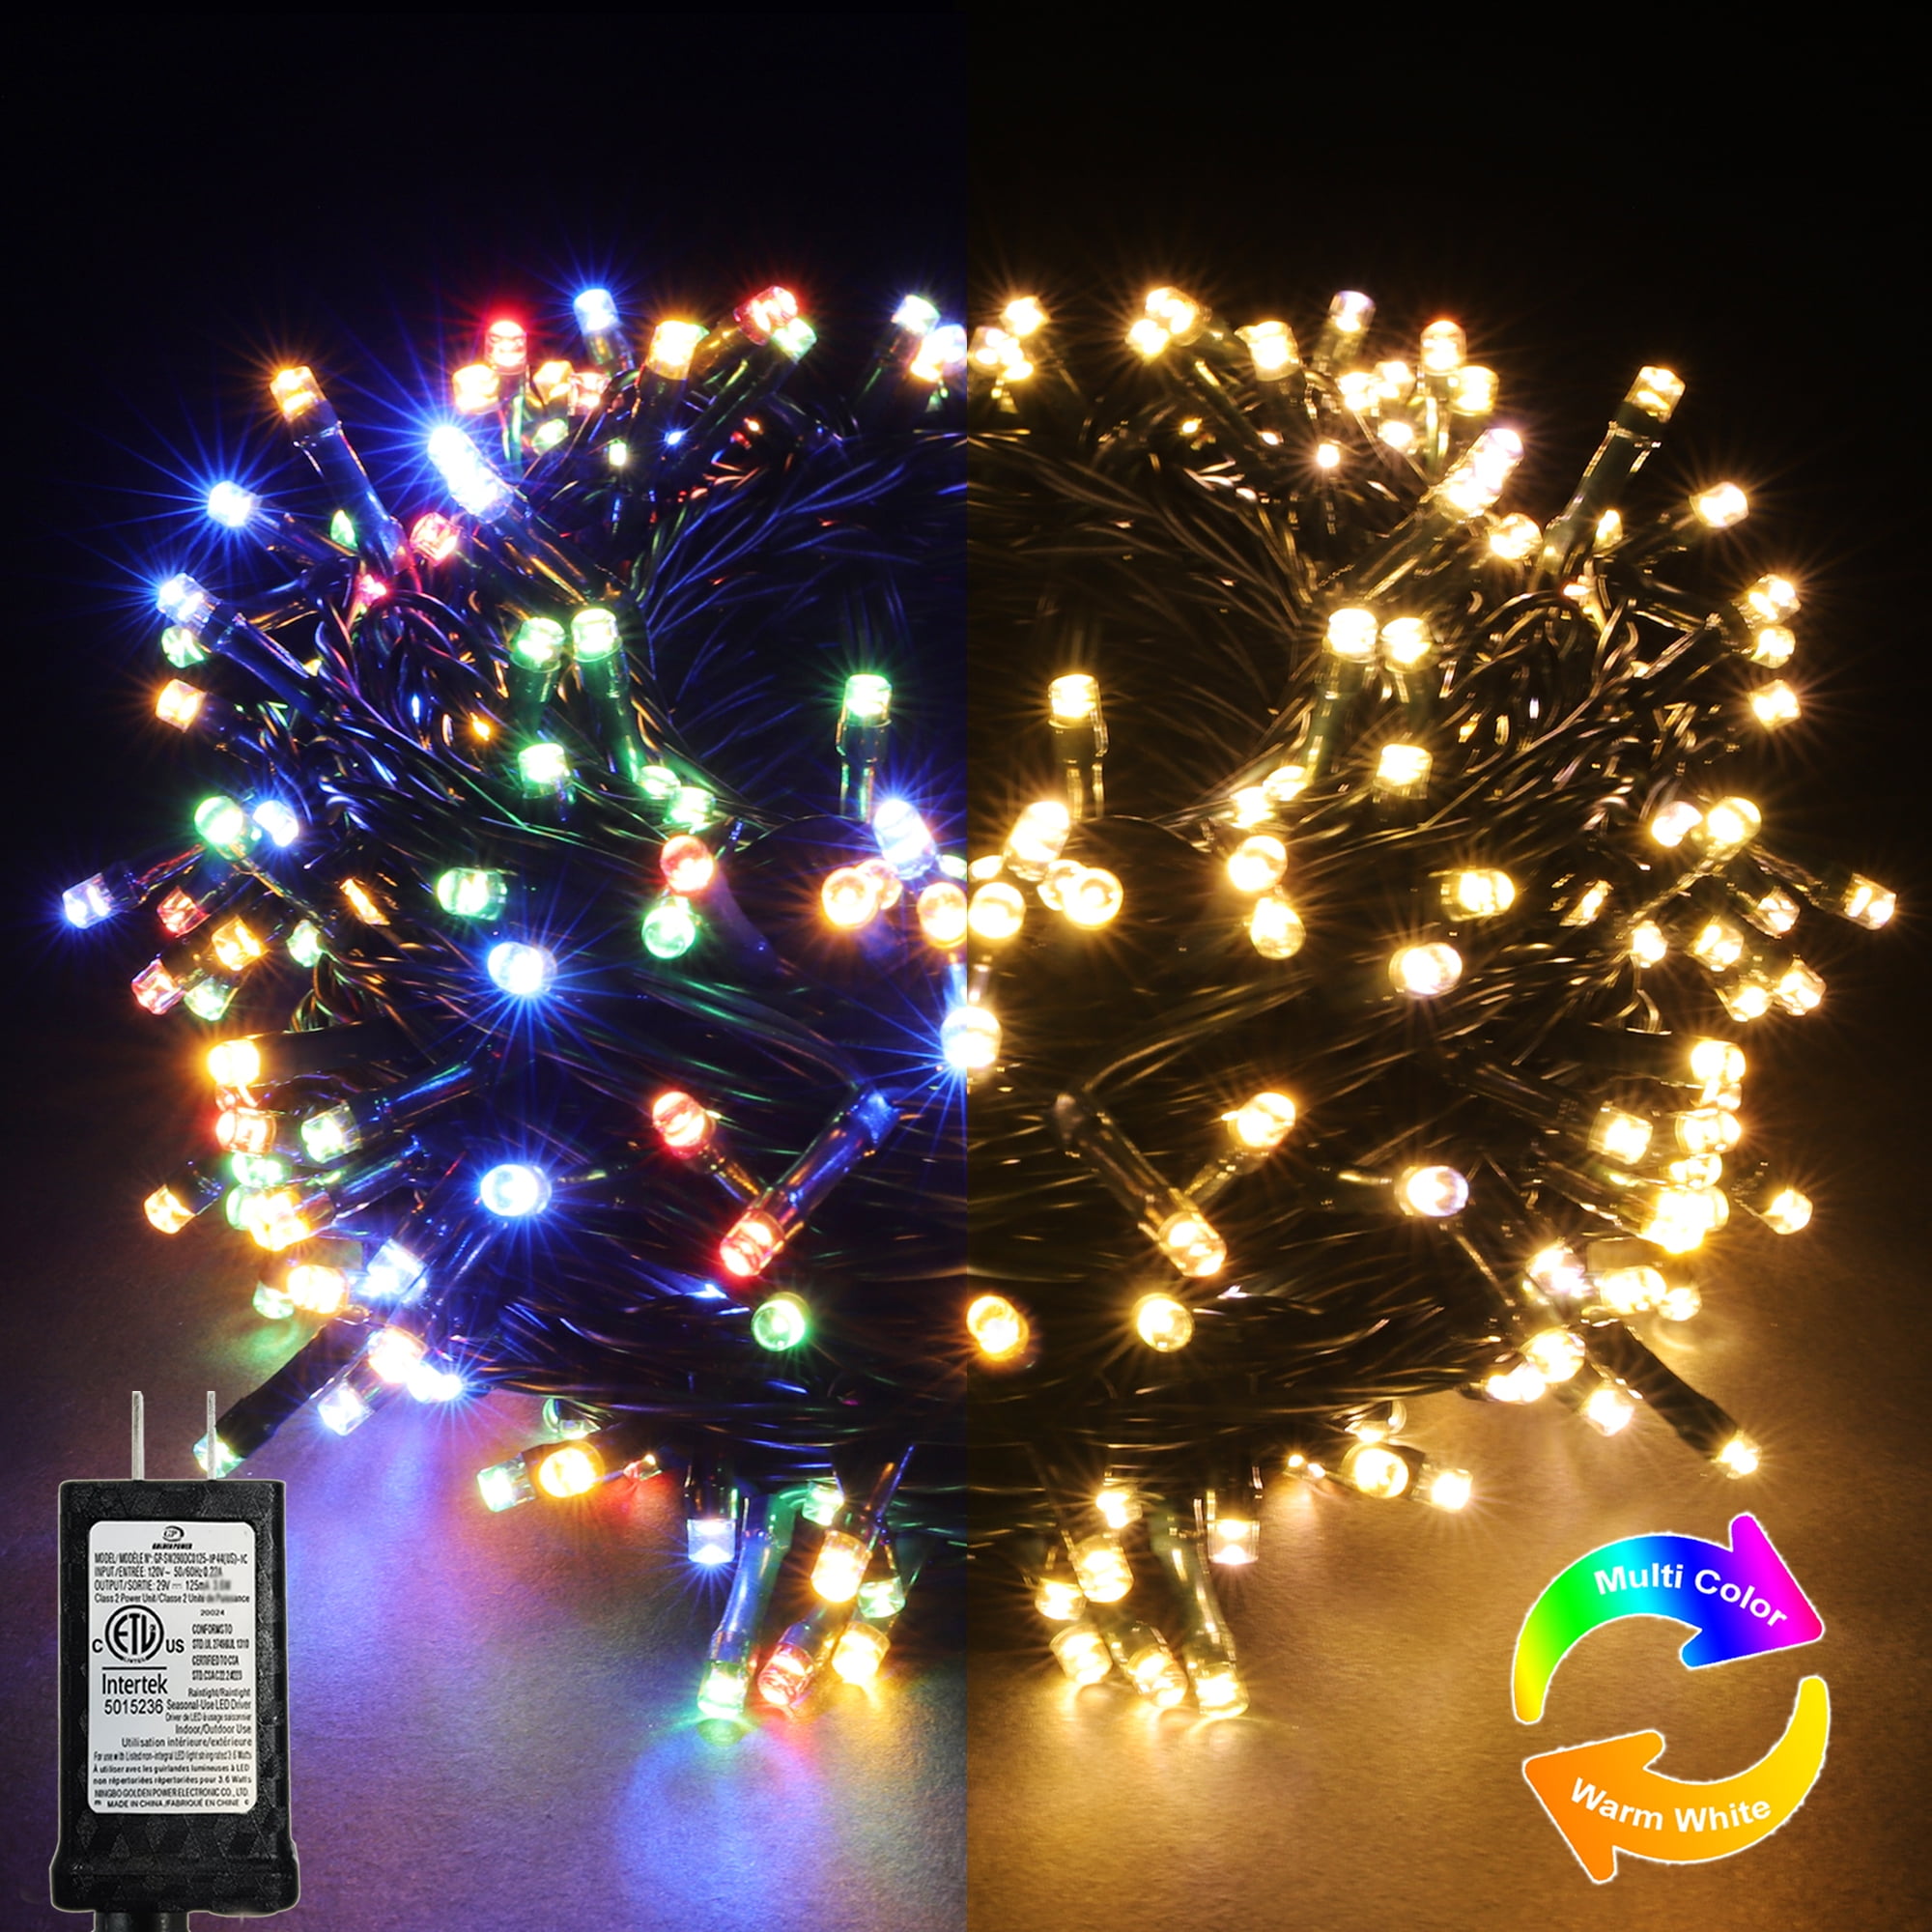 LED Christmas Lights With Remote Control – Prestige Smart Watches